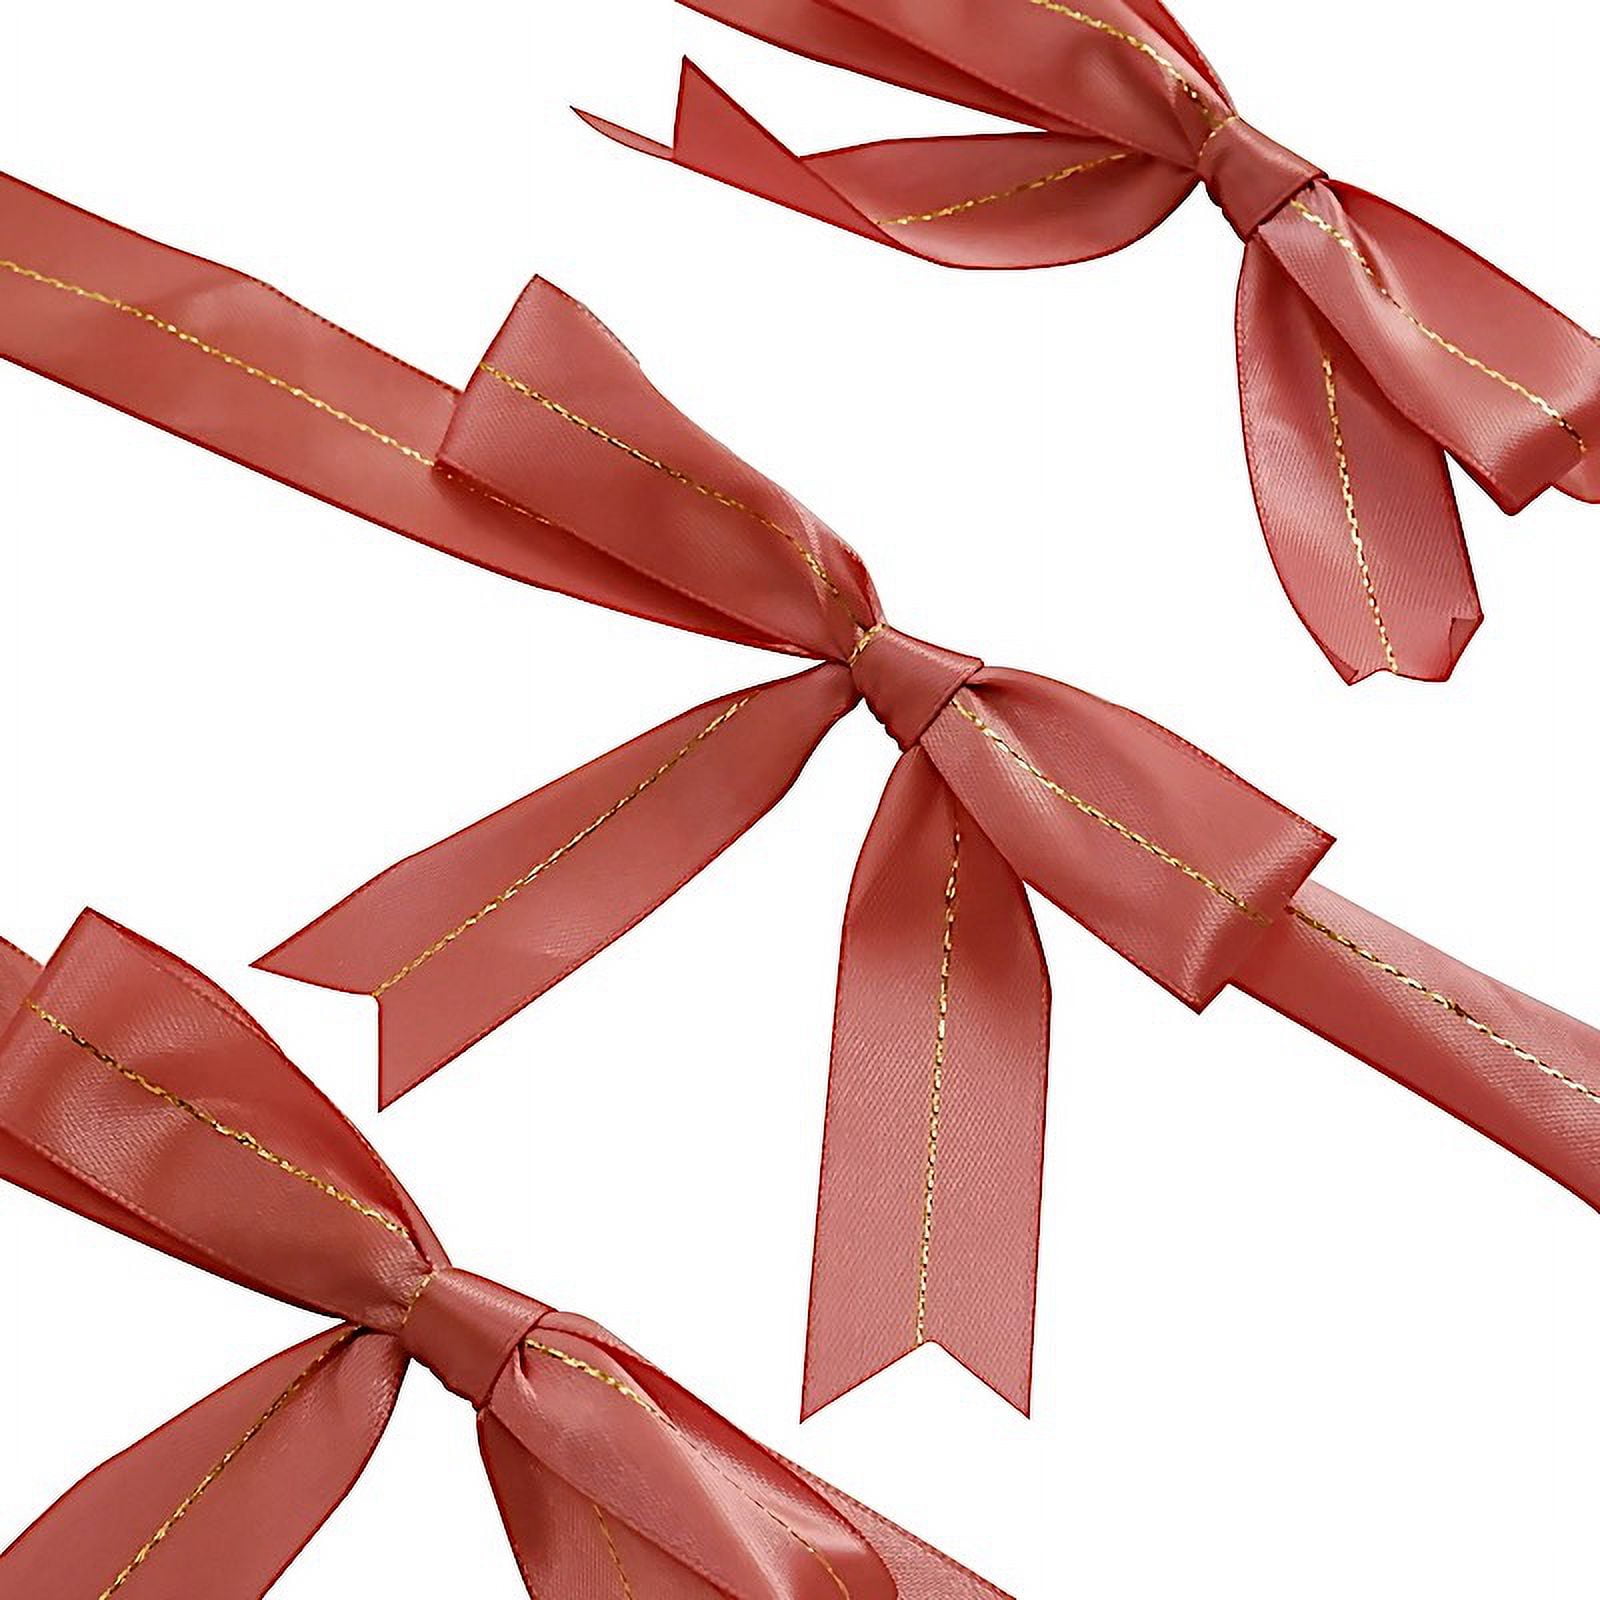 Swedin 2 Rolls (1aa50 Yards, 12aa50 Yards) Pink Satin Ribbon for Gift Wrapping, Wedding, Bow Making Other Projects